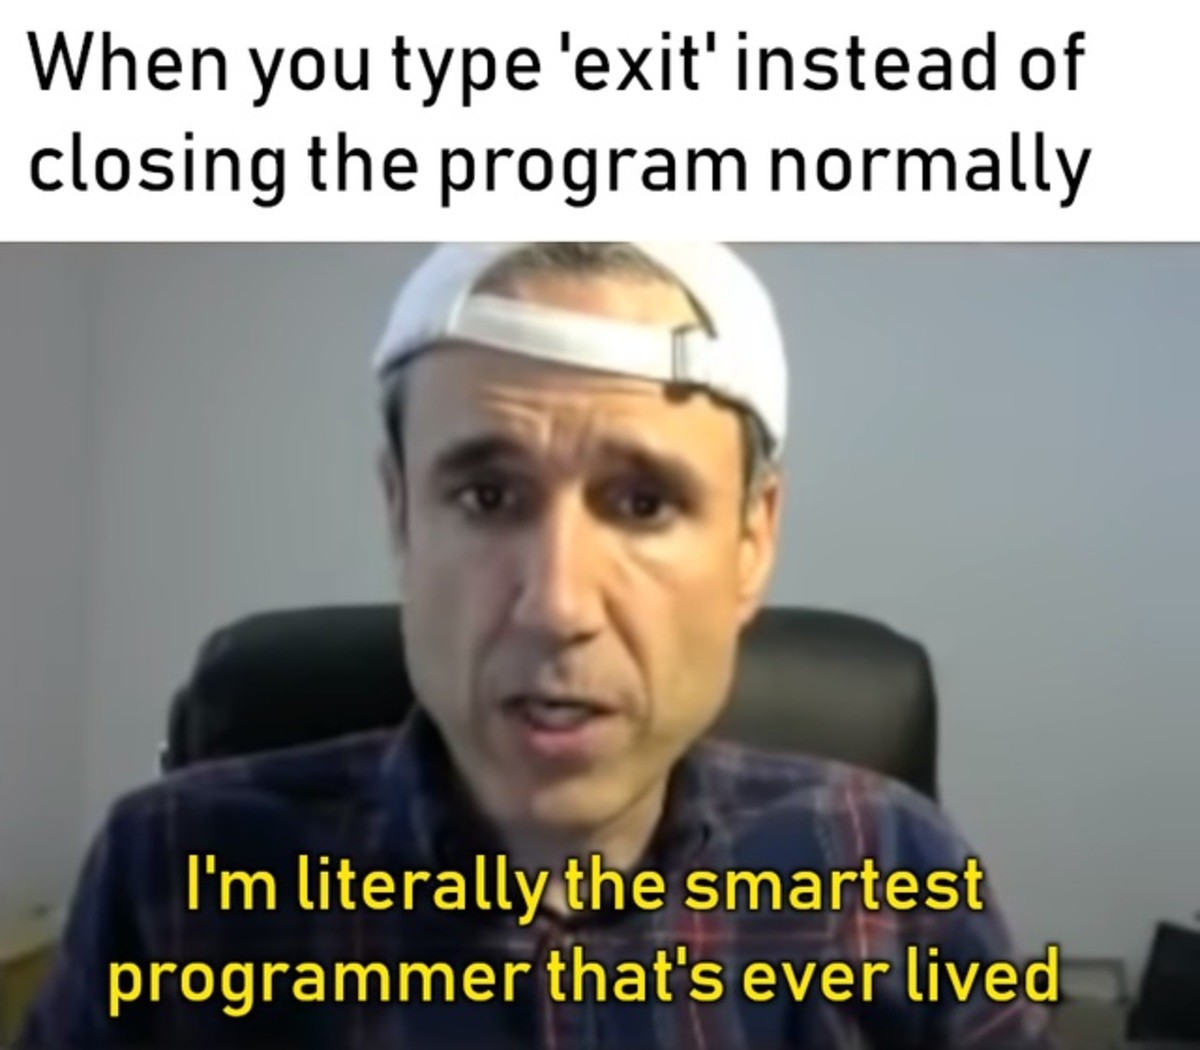 Smart. .. terry legitimately was the smartest programmer who ever lived. He was a prohpet. I miss him.. I hate the cia for killing him